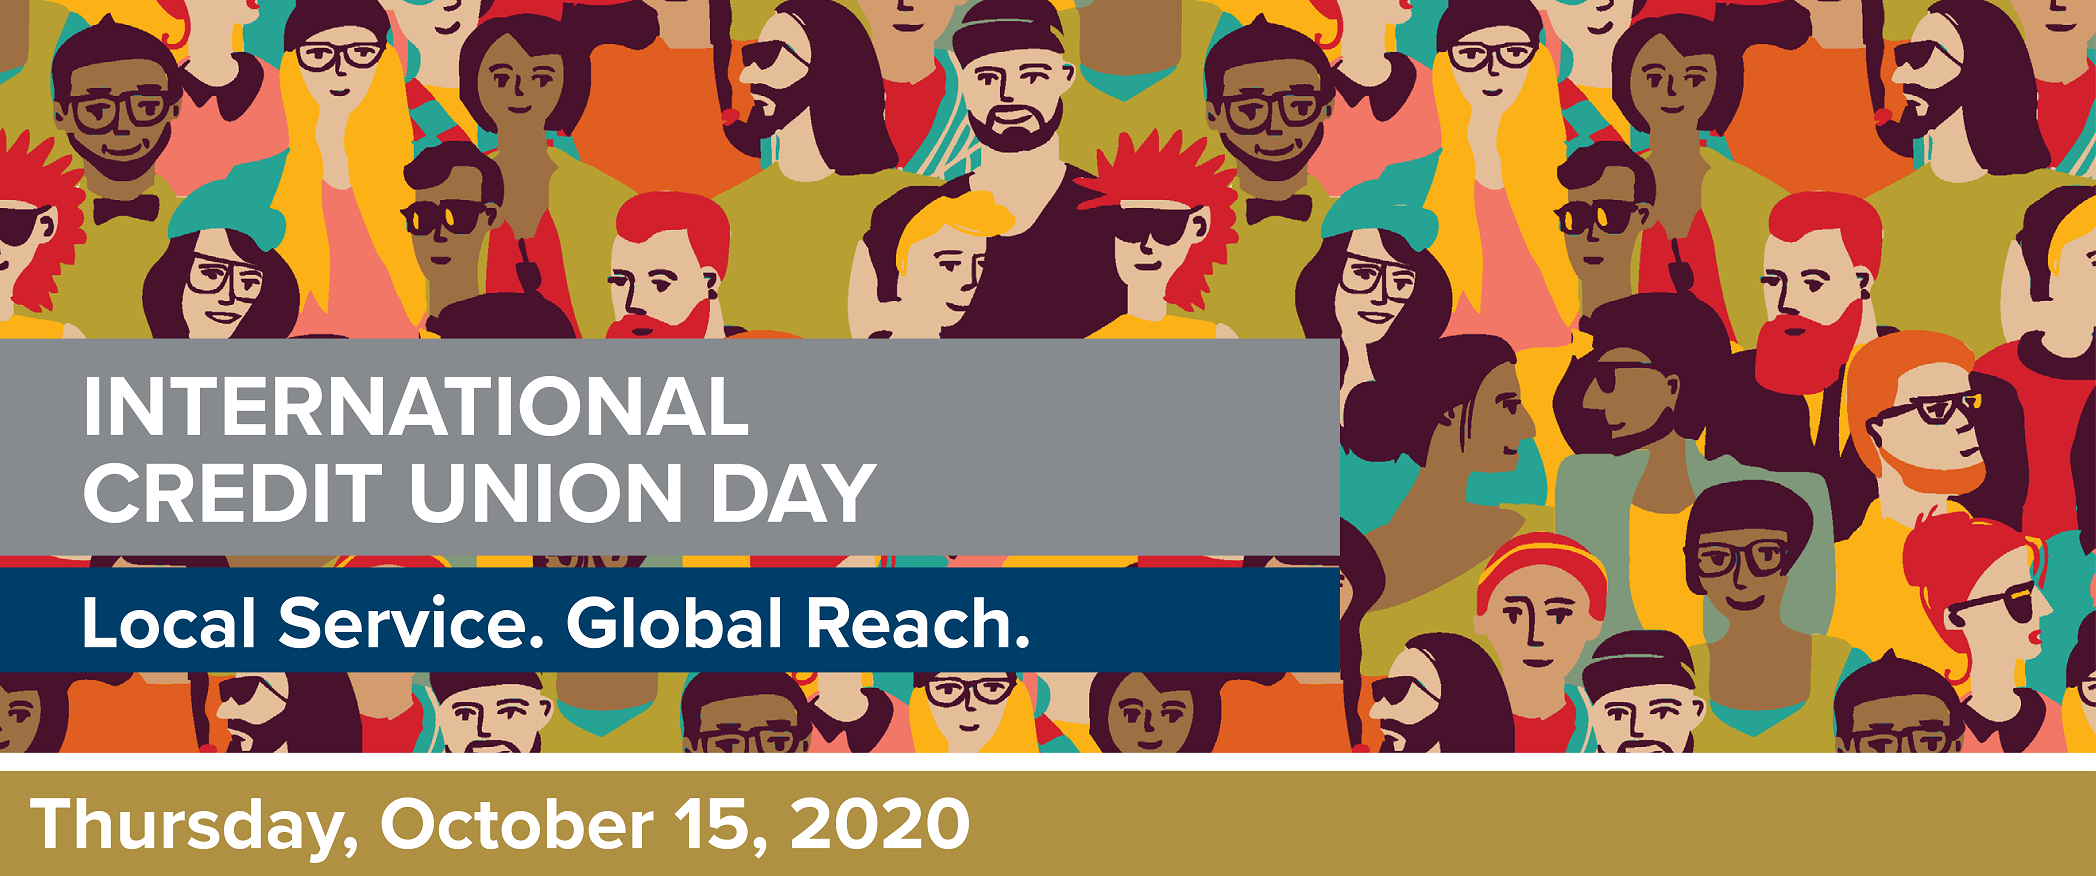 International Credit Union Day - Local Service. Global Reach. Thursday October 15 2020